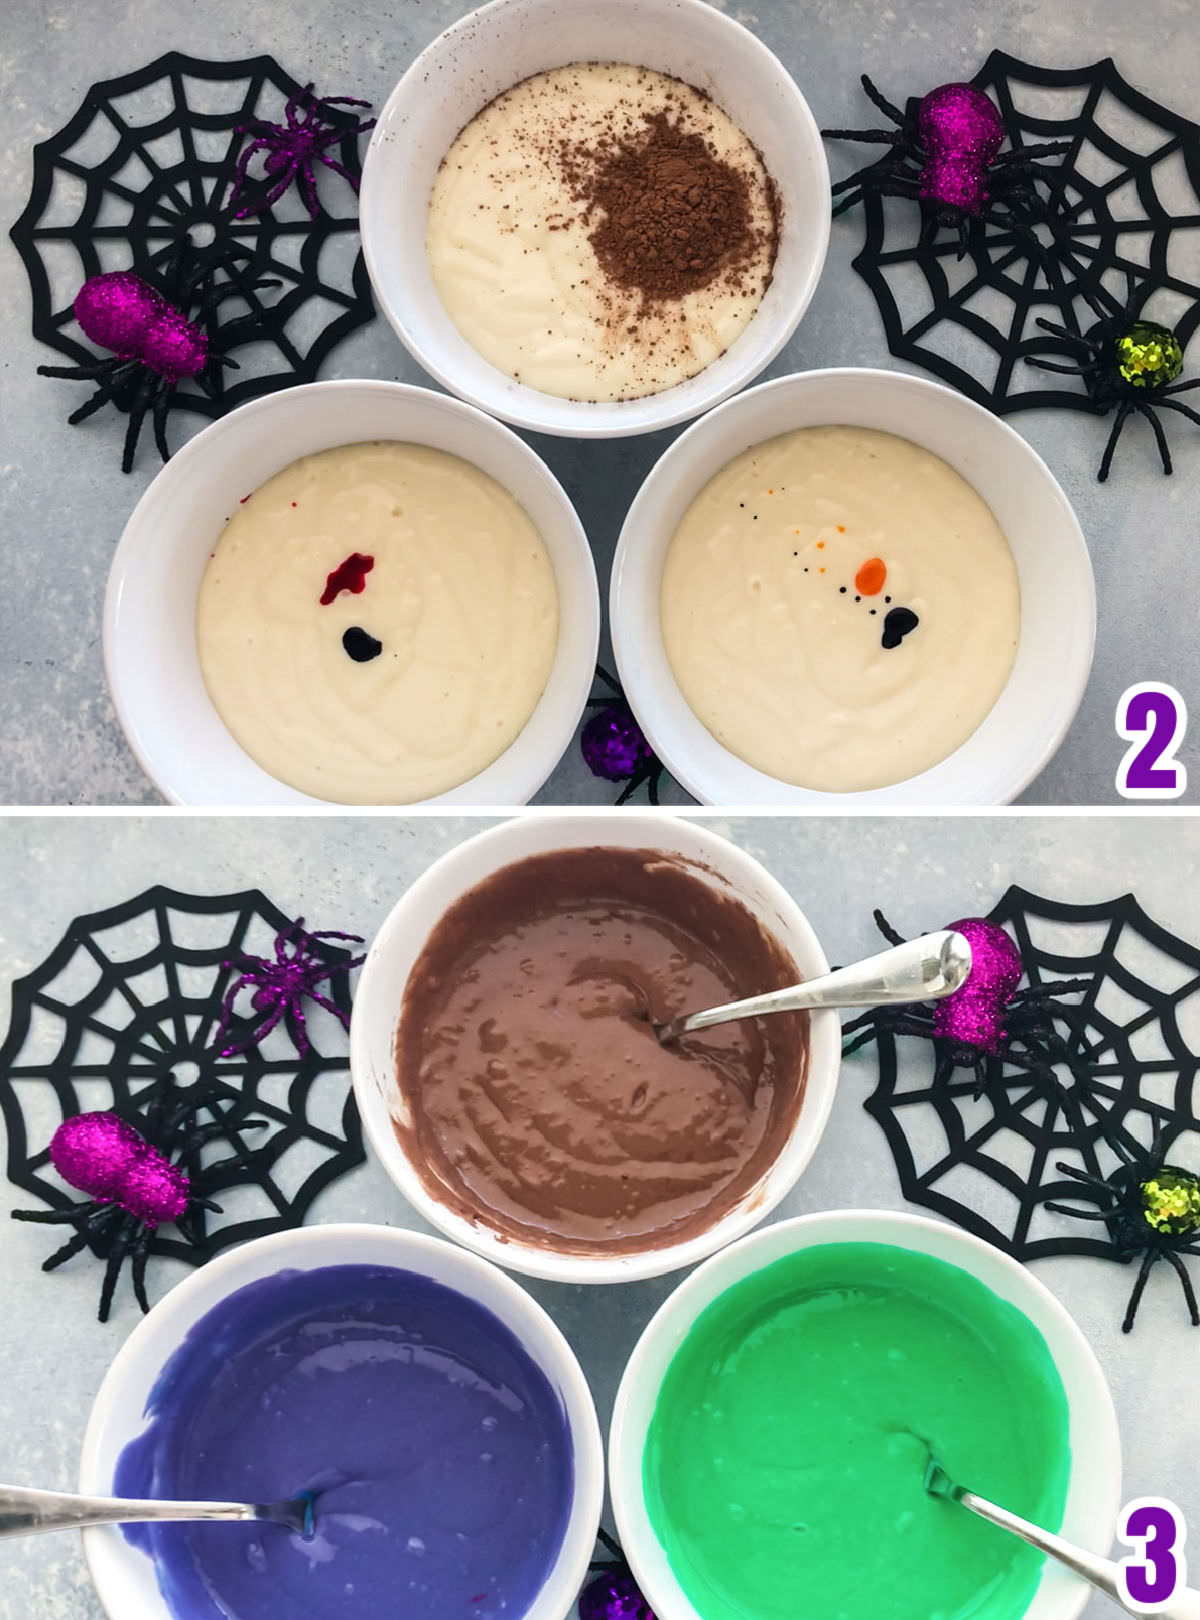 Collage image showing how to tint the cake batter purple, green and chocolate.